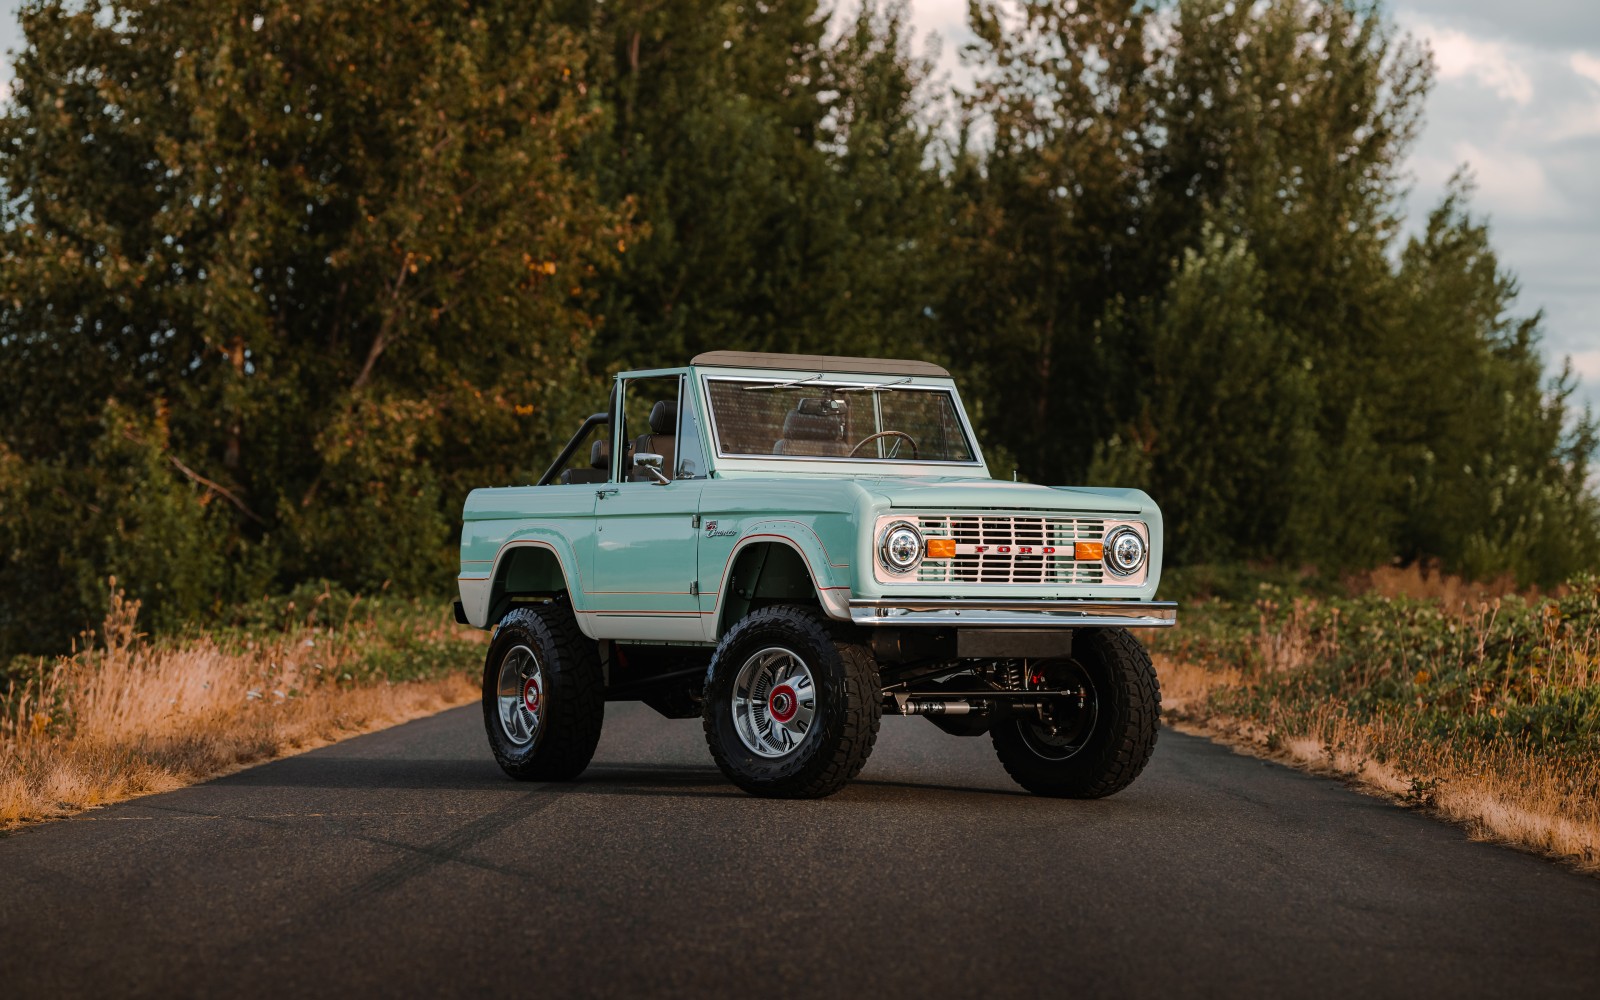 Want a 1972 Ford Bronco turned into an EV? It'll cost you $380,000